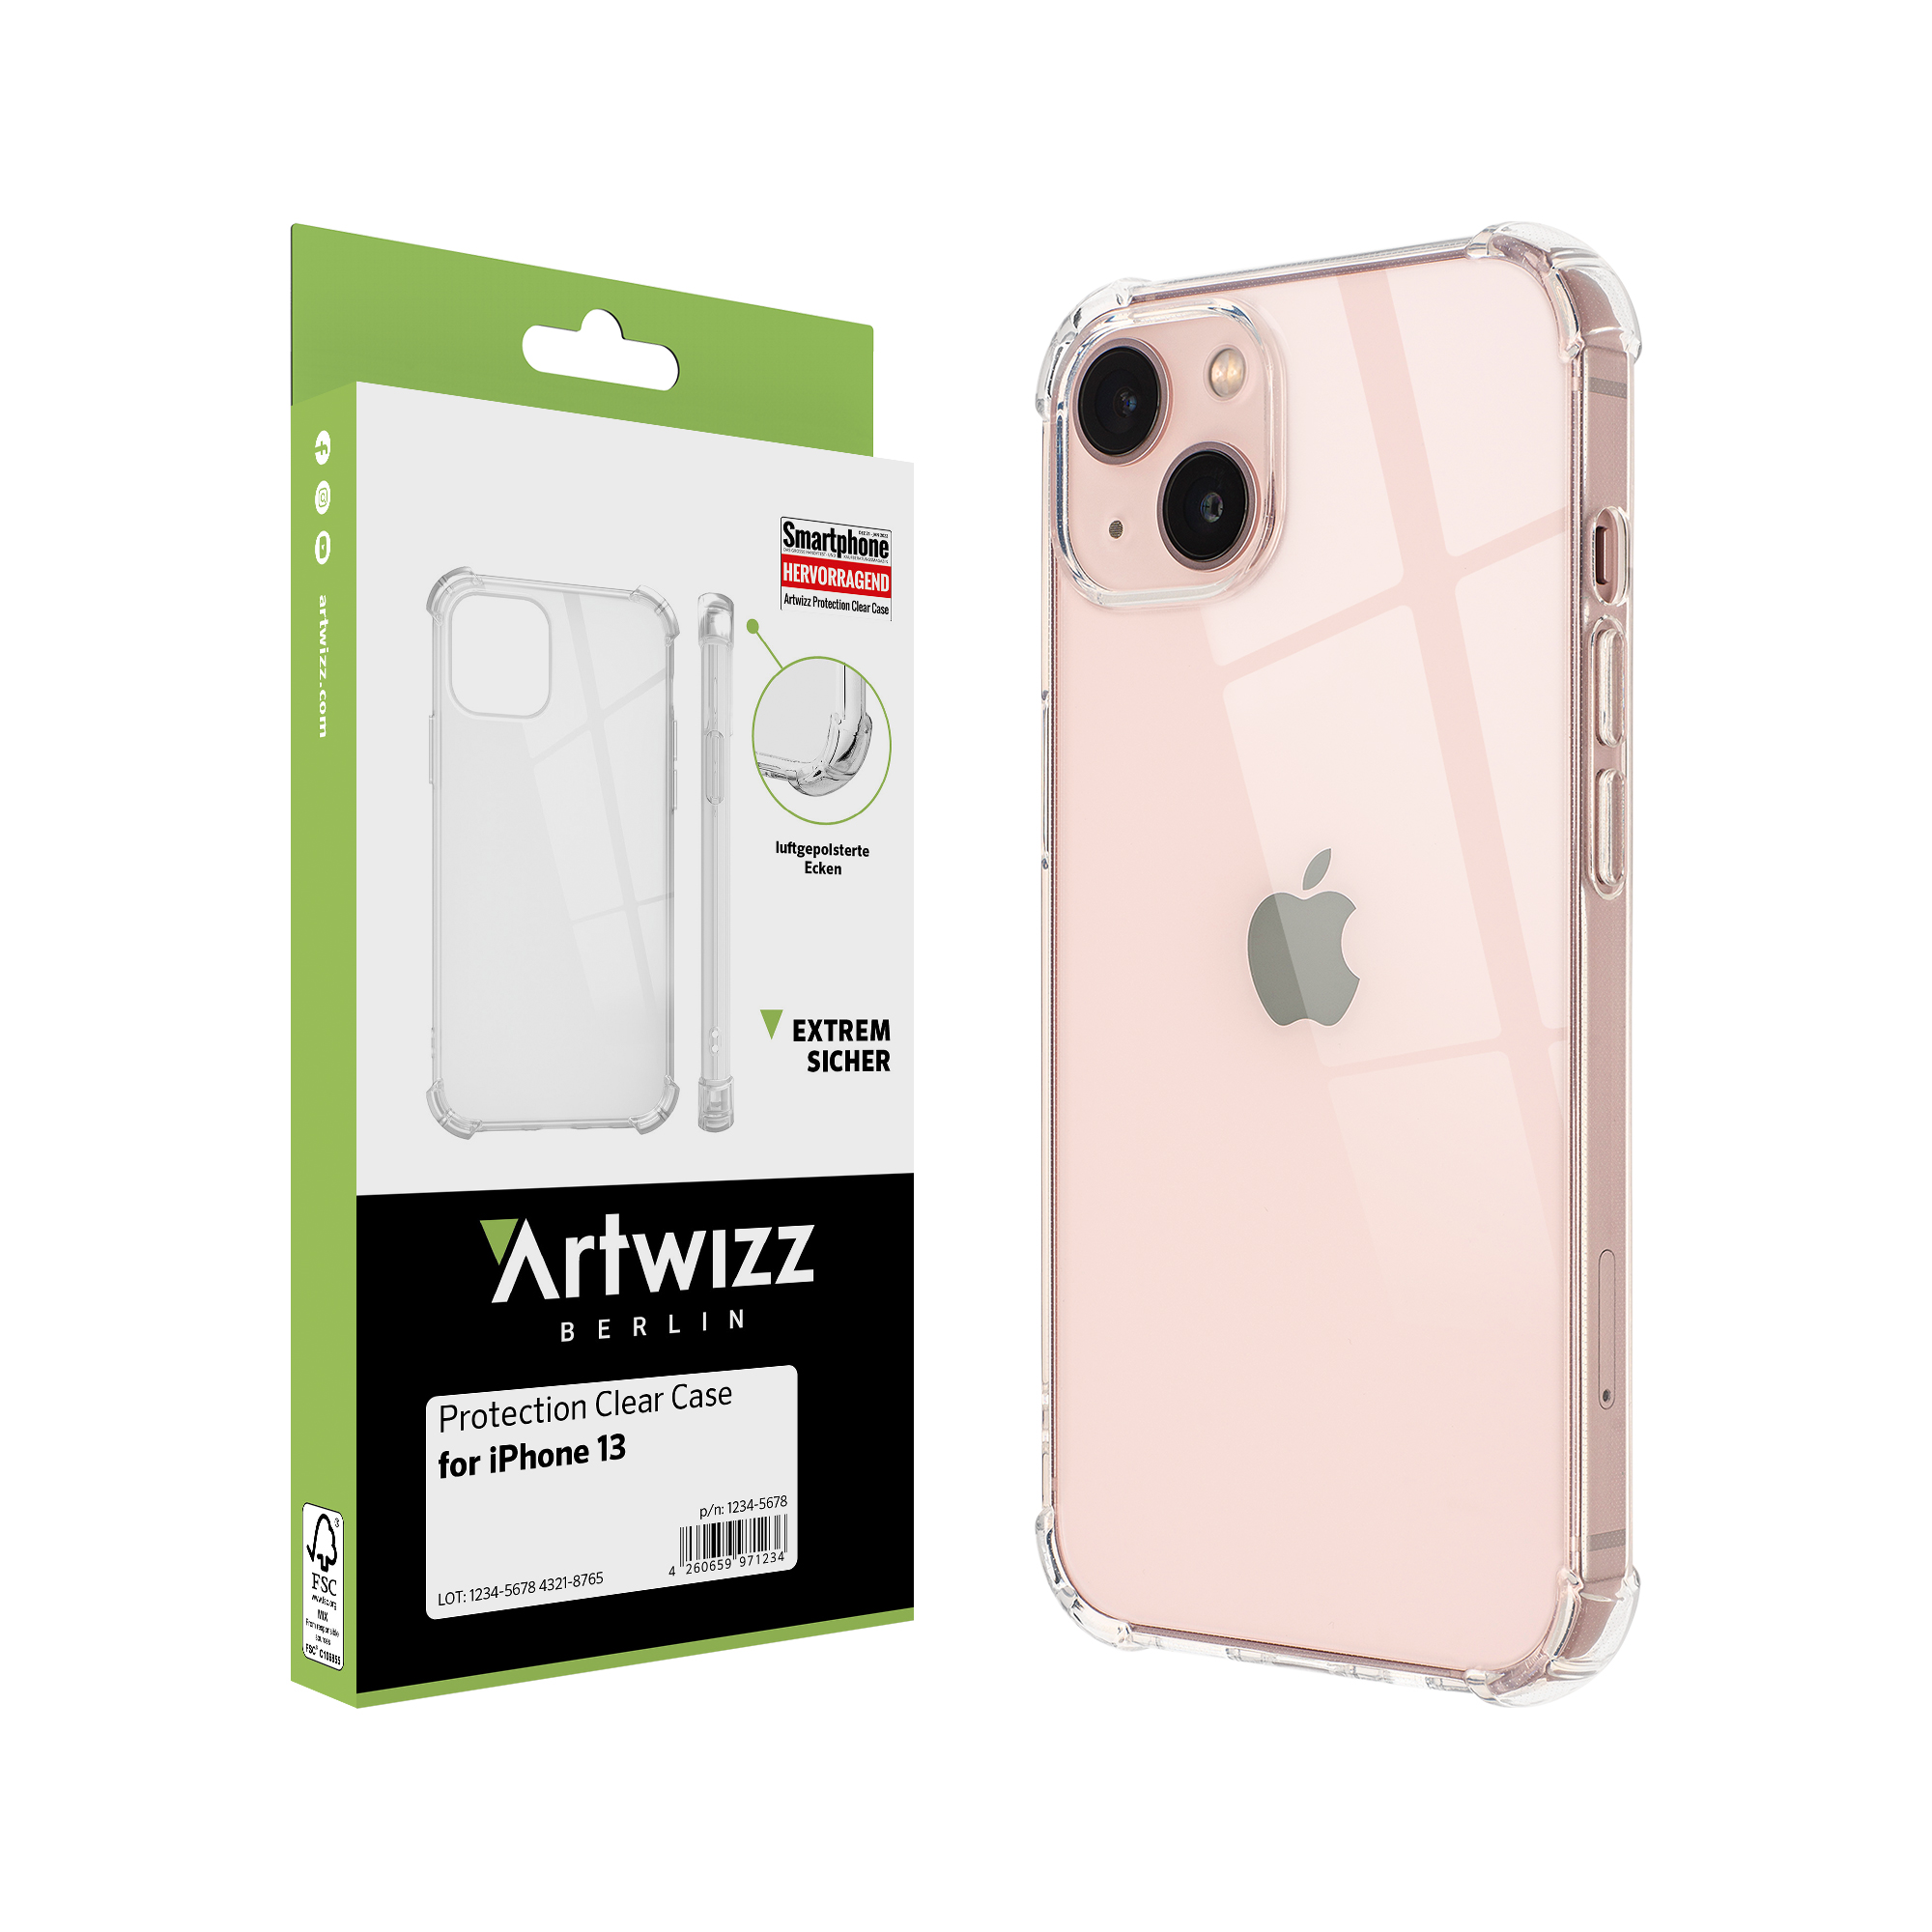 Protection Clear iPhone ARTWIZZ 13, Transparent Backcover, Case, Apple,